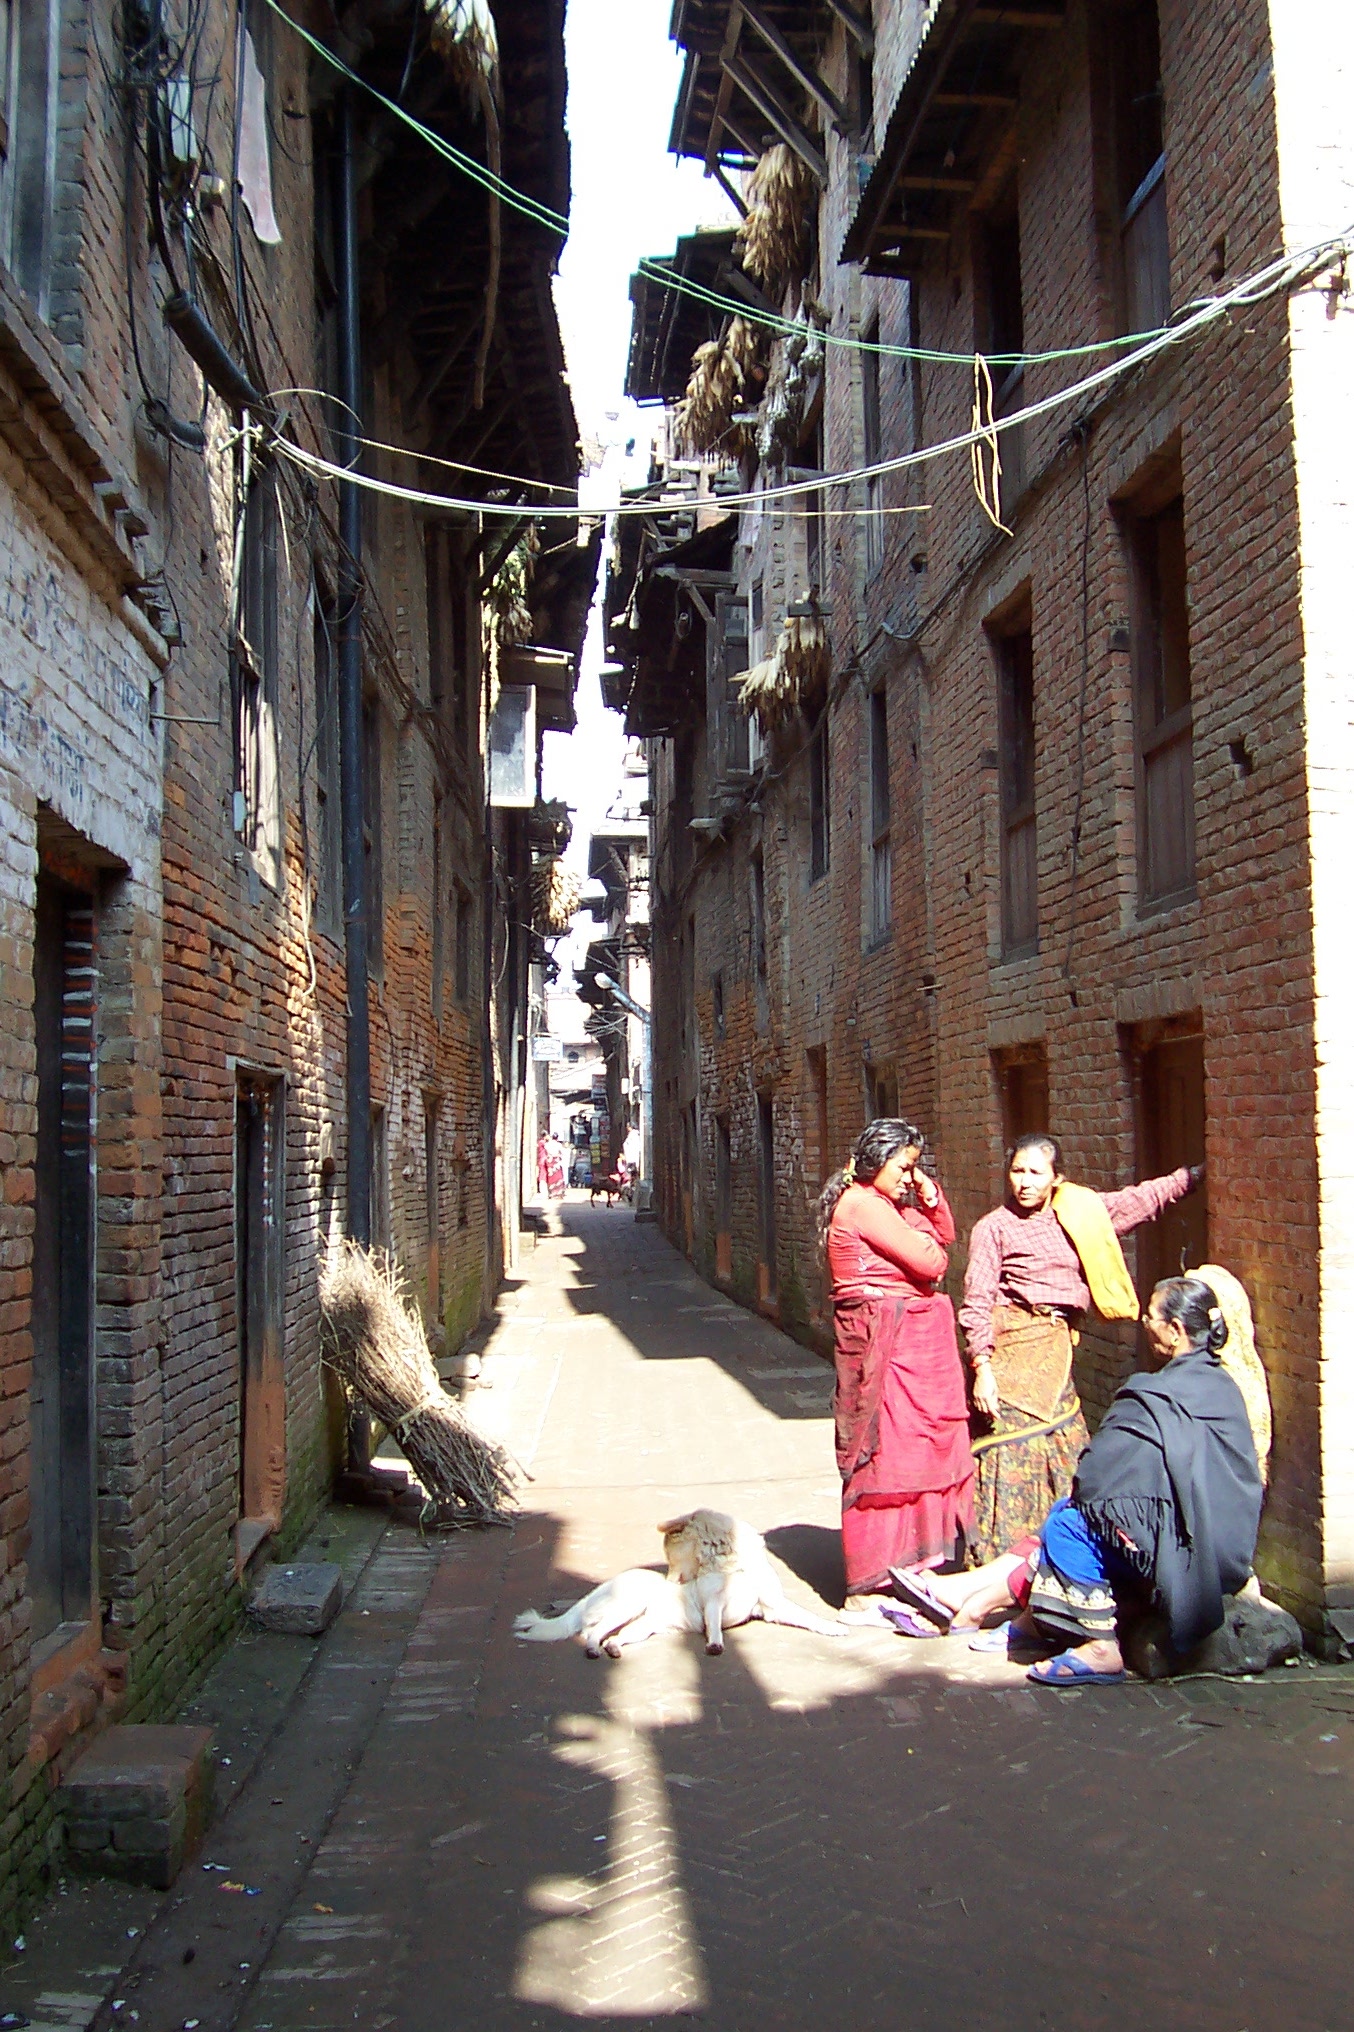 nature character humanoids annet nepal alley woman women dog street city cityscape bolivia